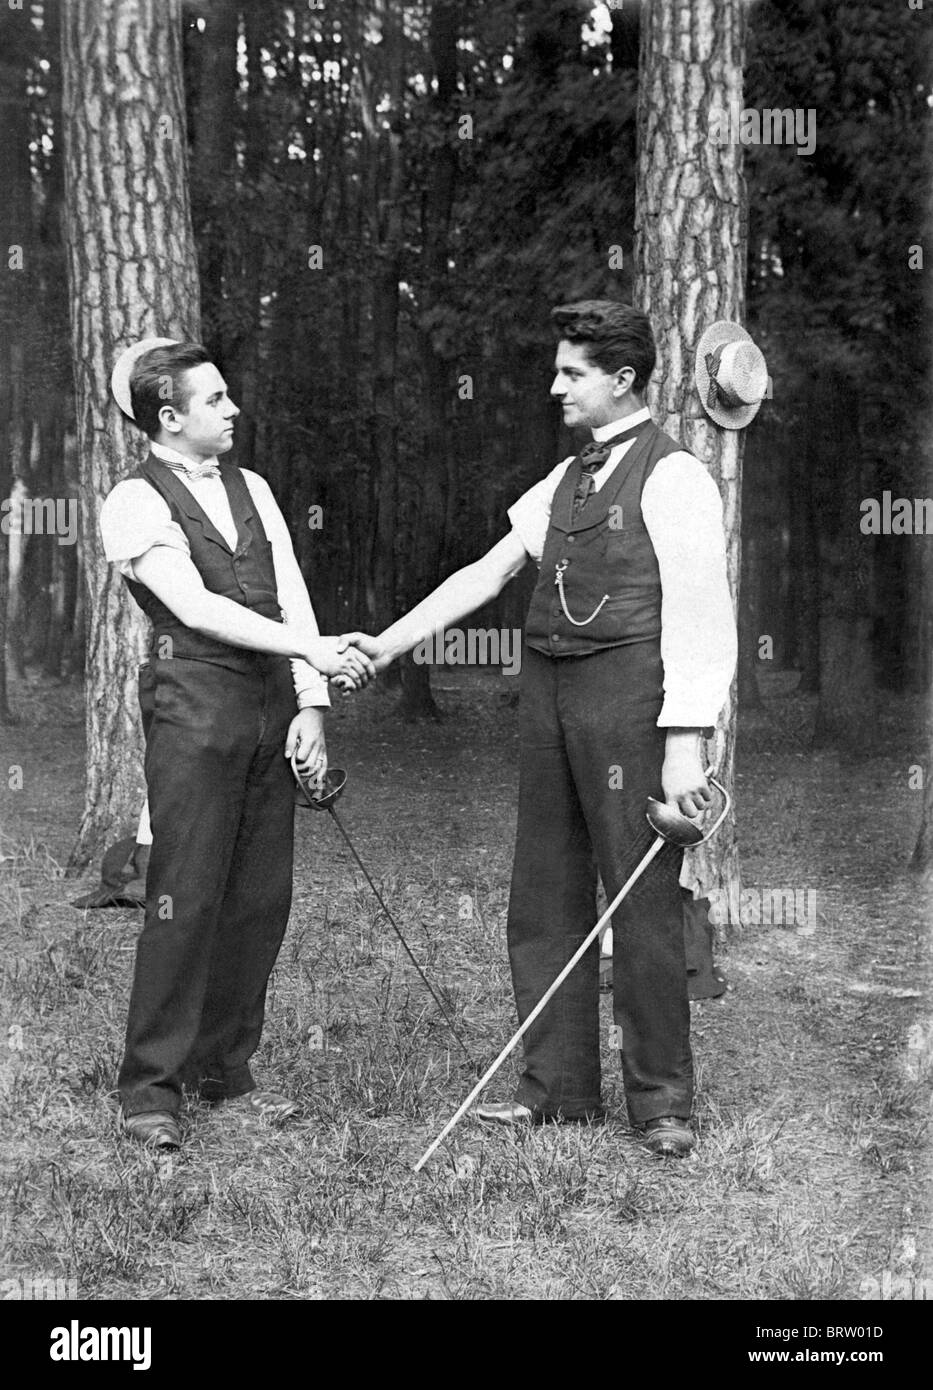 Two student having a duel, historical image, ca. 1912 Stock Photo